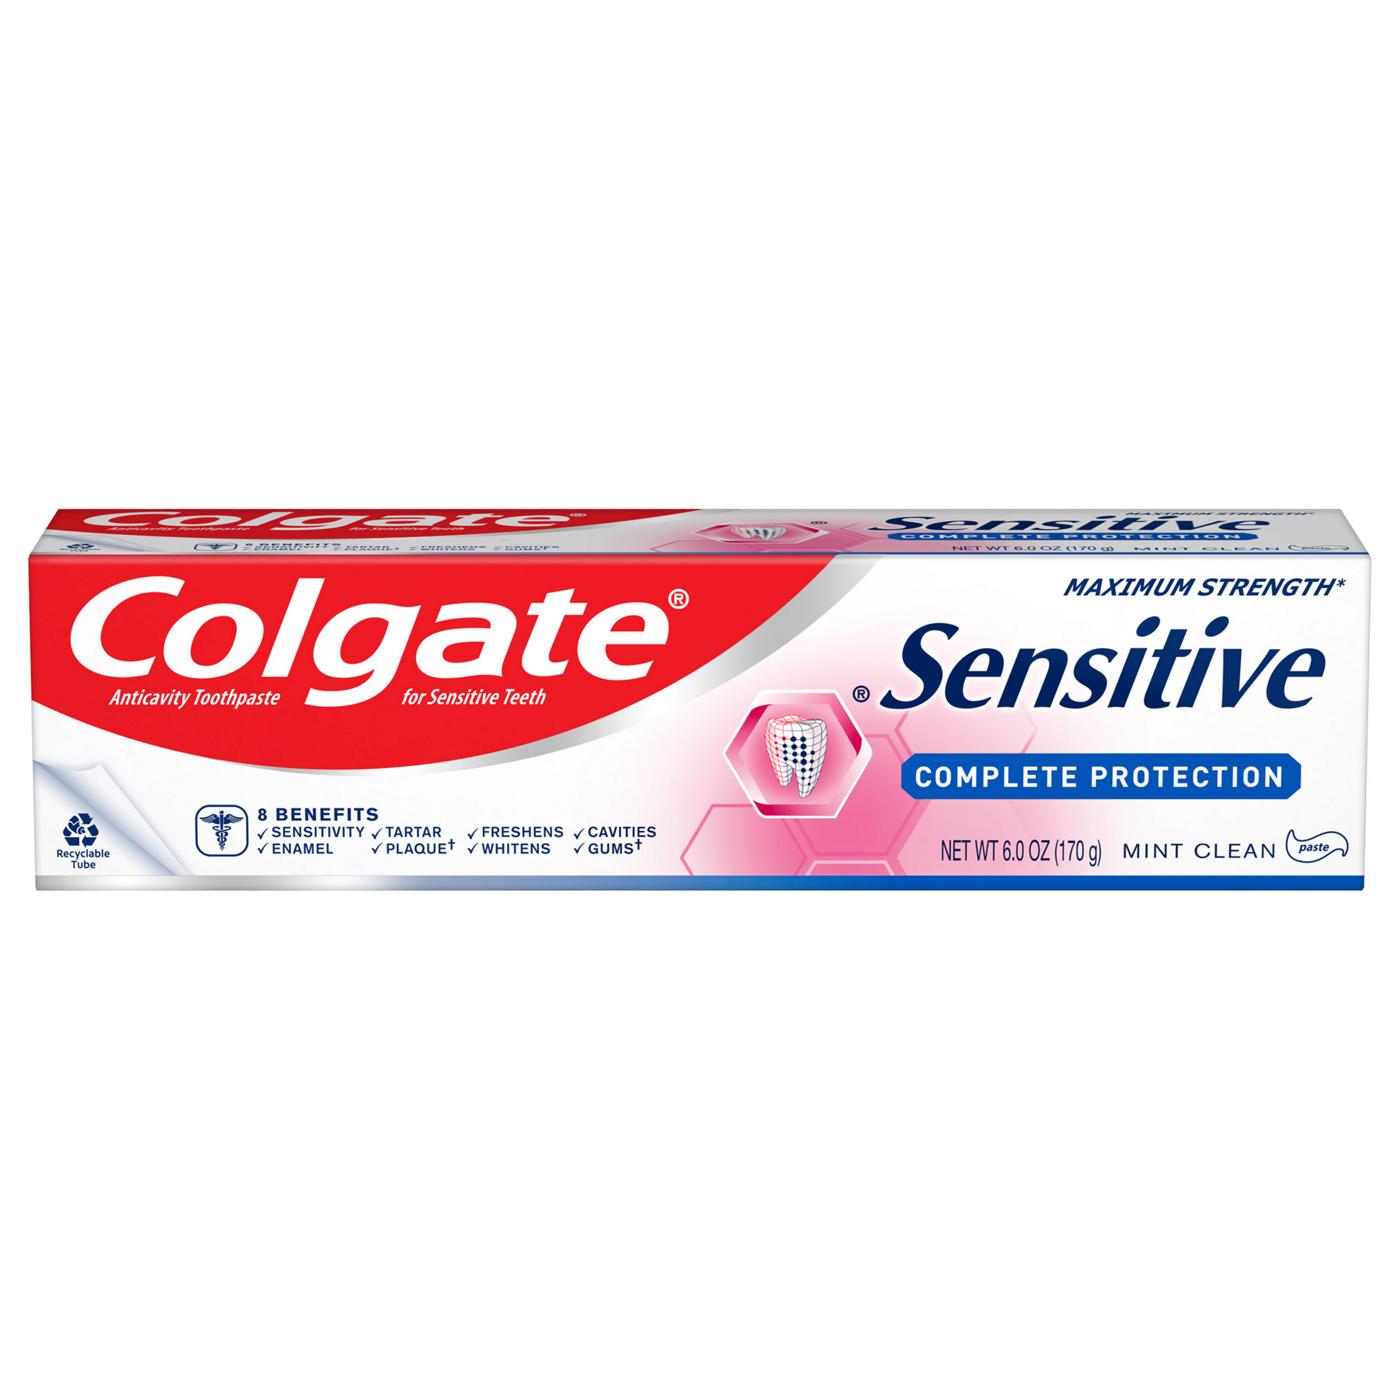 Colgate Sensitive Complete Protection Anticavity Toothpaste - Mint Clean; image 1 of 3